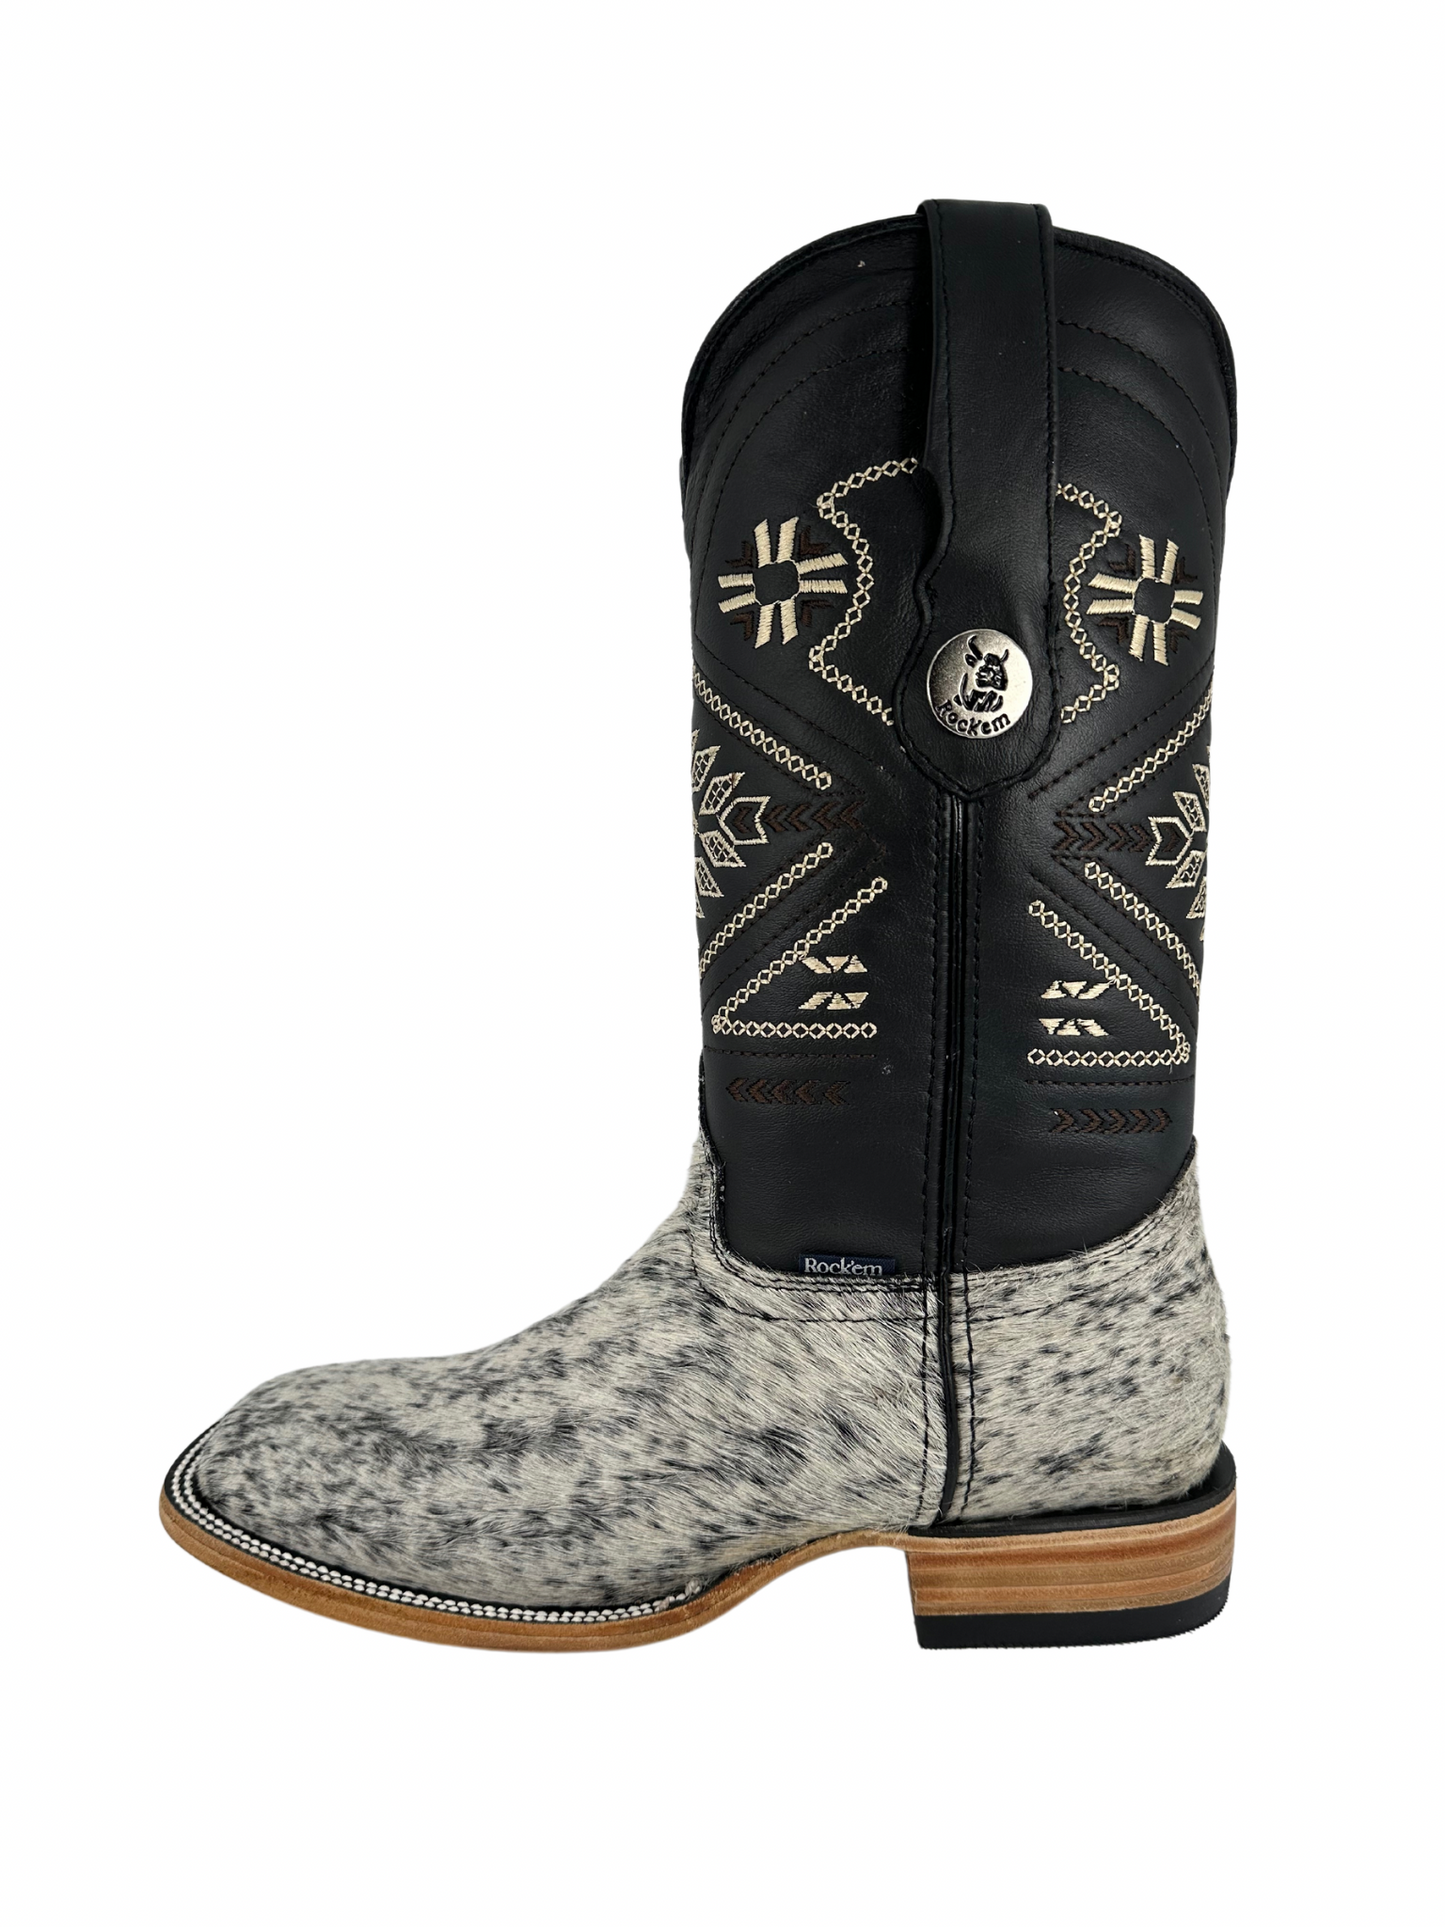 Rock'em Women's Cow Hair Boots Size: 8.5 *AS SEEN ON IMAGE*